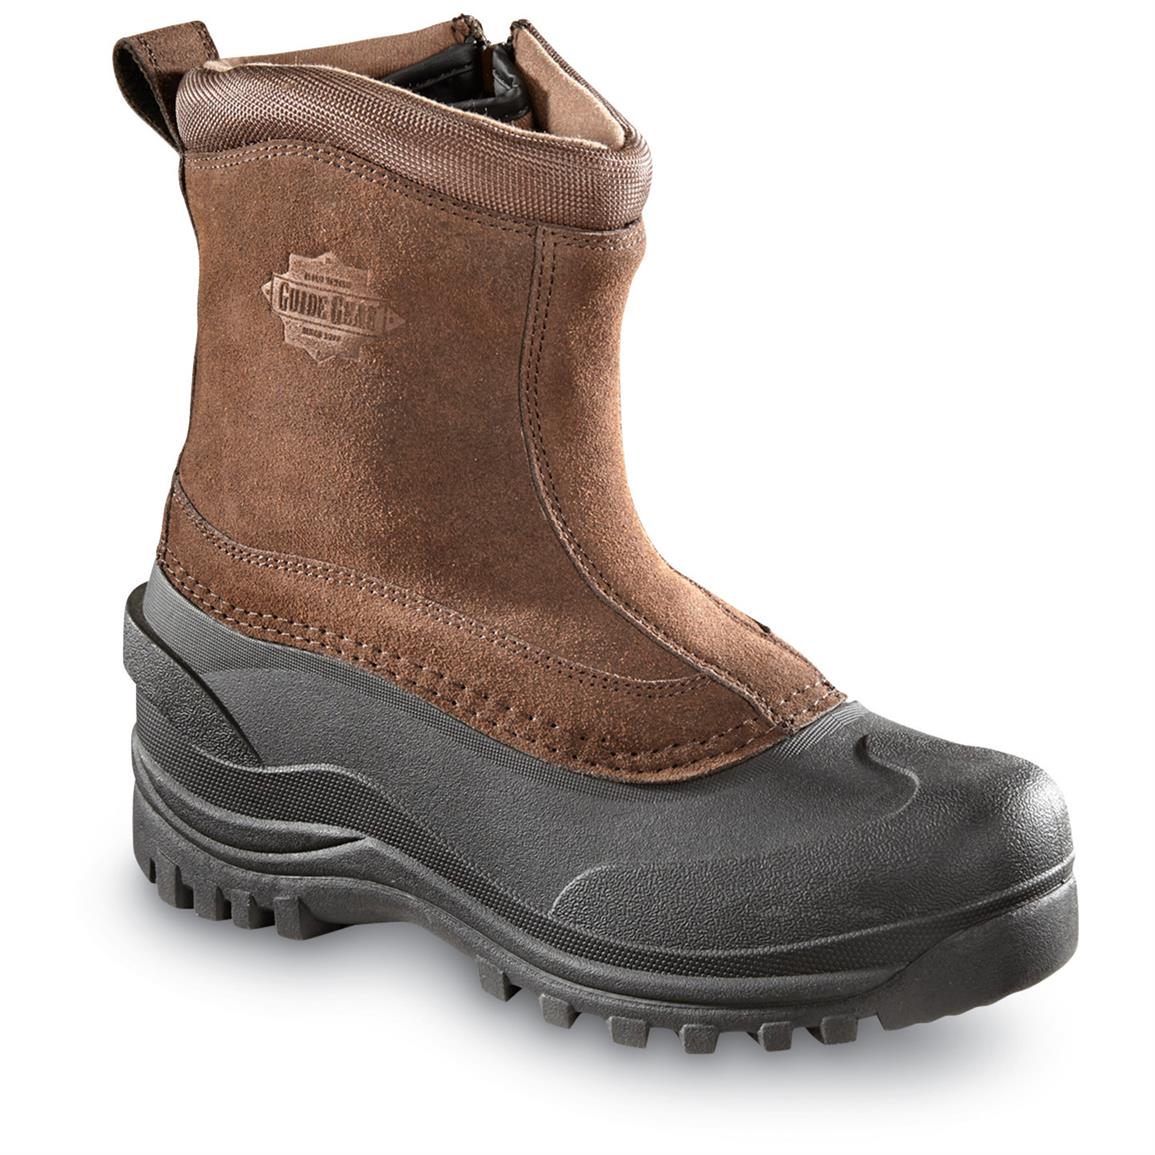 men's insulated winter shoes